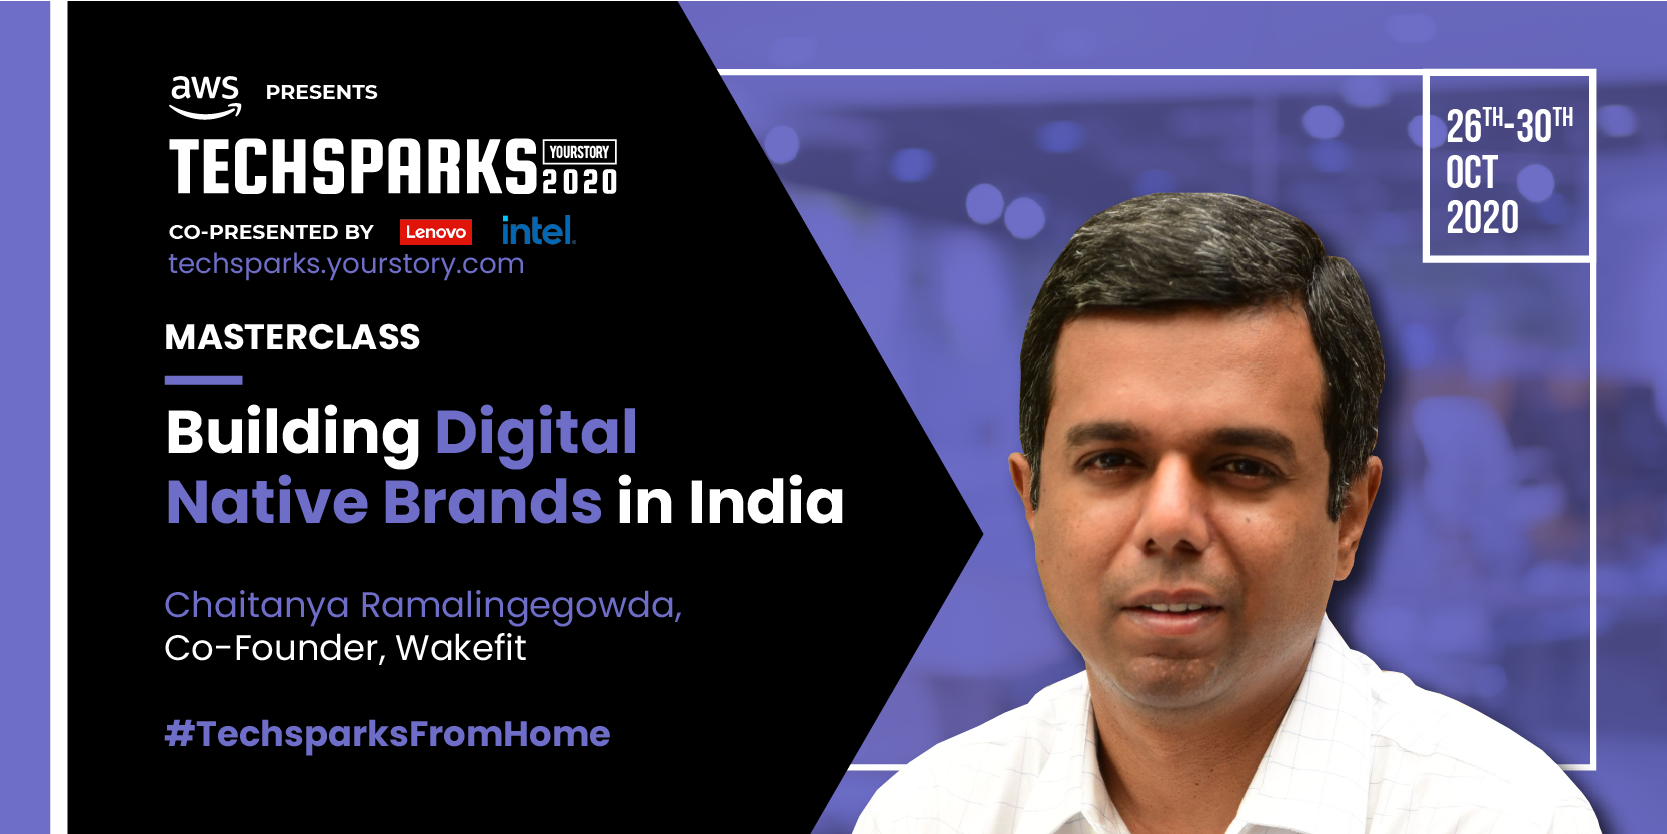 [TechSparks 2020] It is vital to build customer trust to sustain your digital brand, says Chaitanya Ramalingegowda of Wakefit
